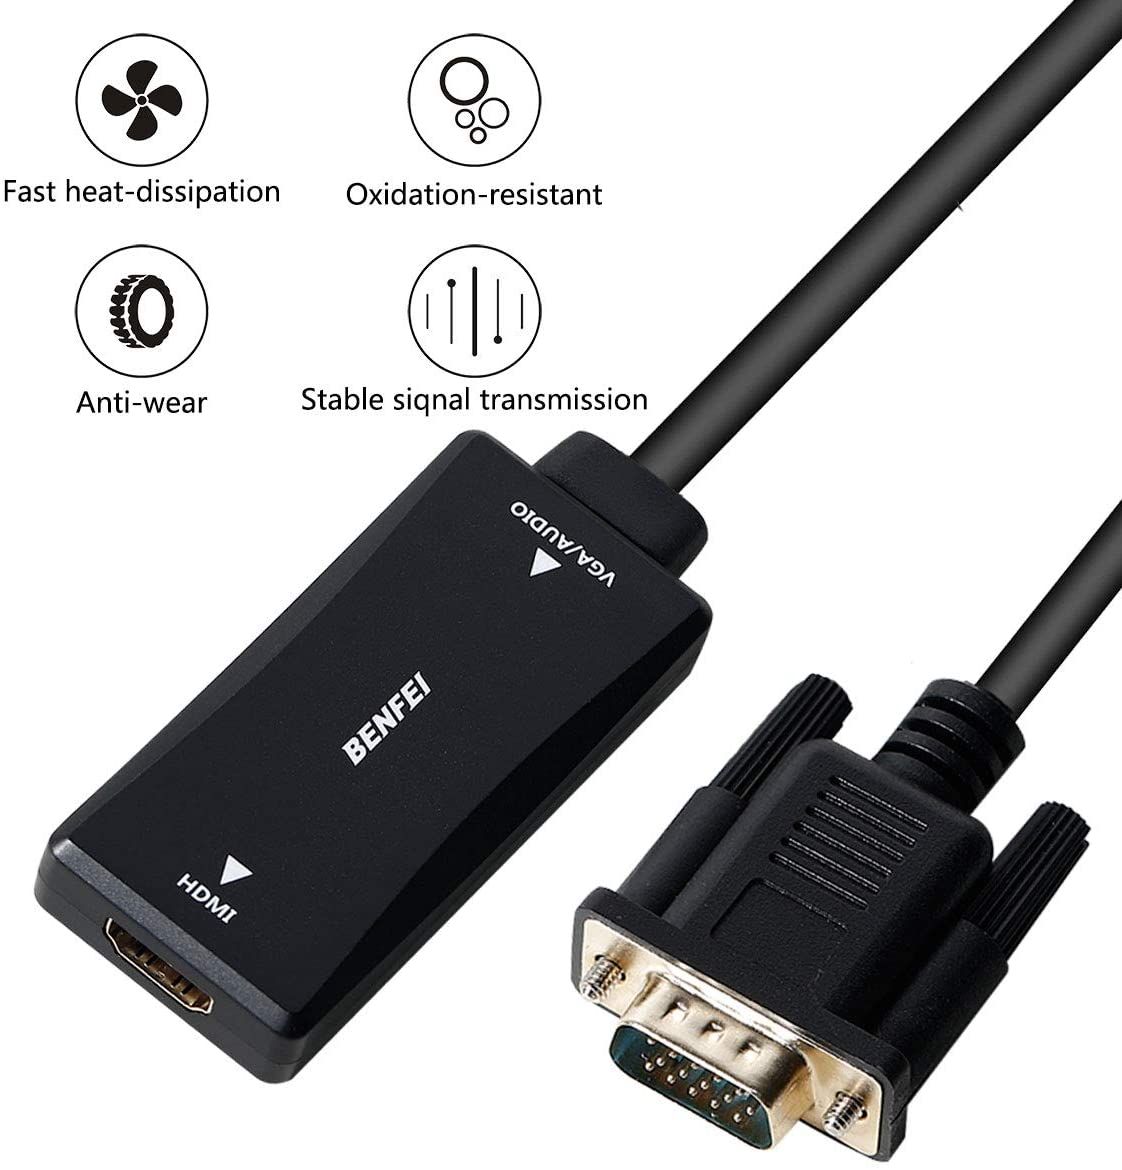 Benfei VGA to HDMI Adapter features